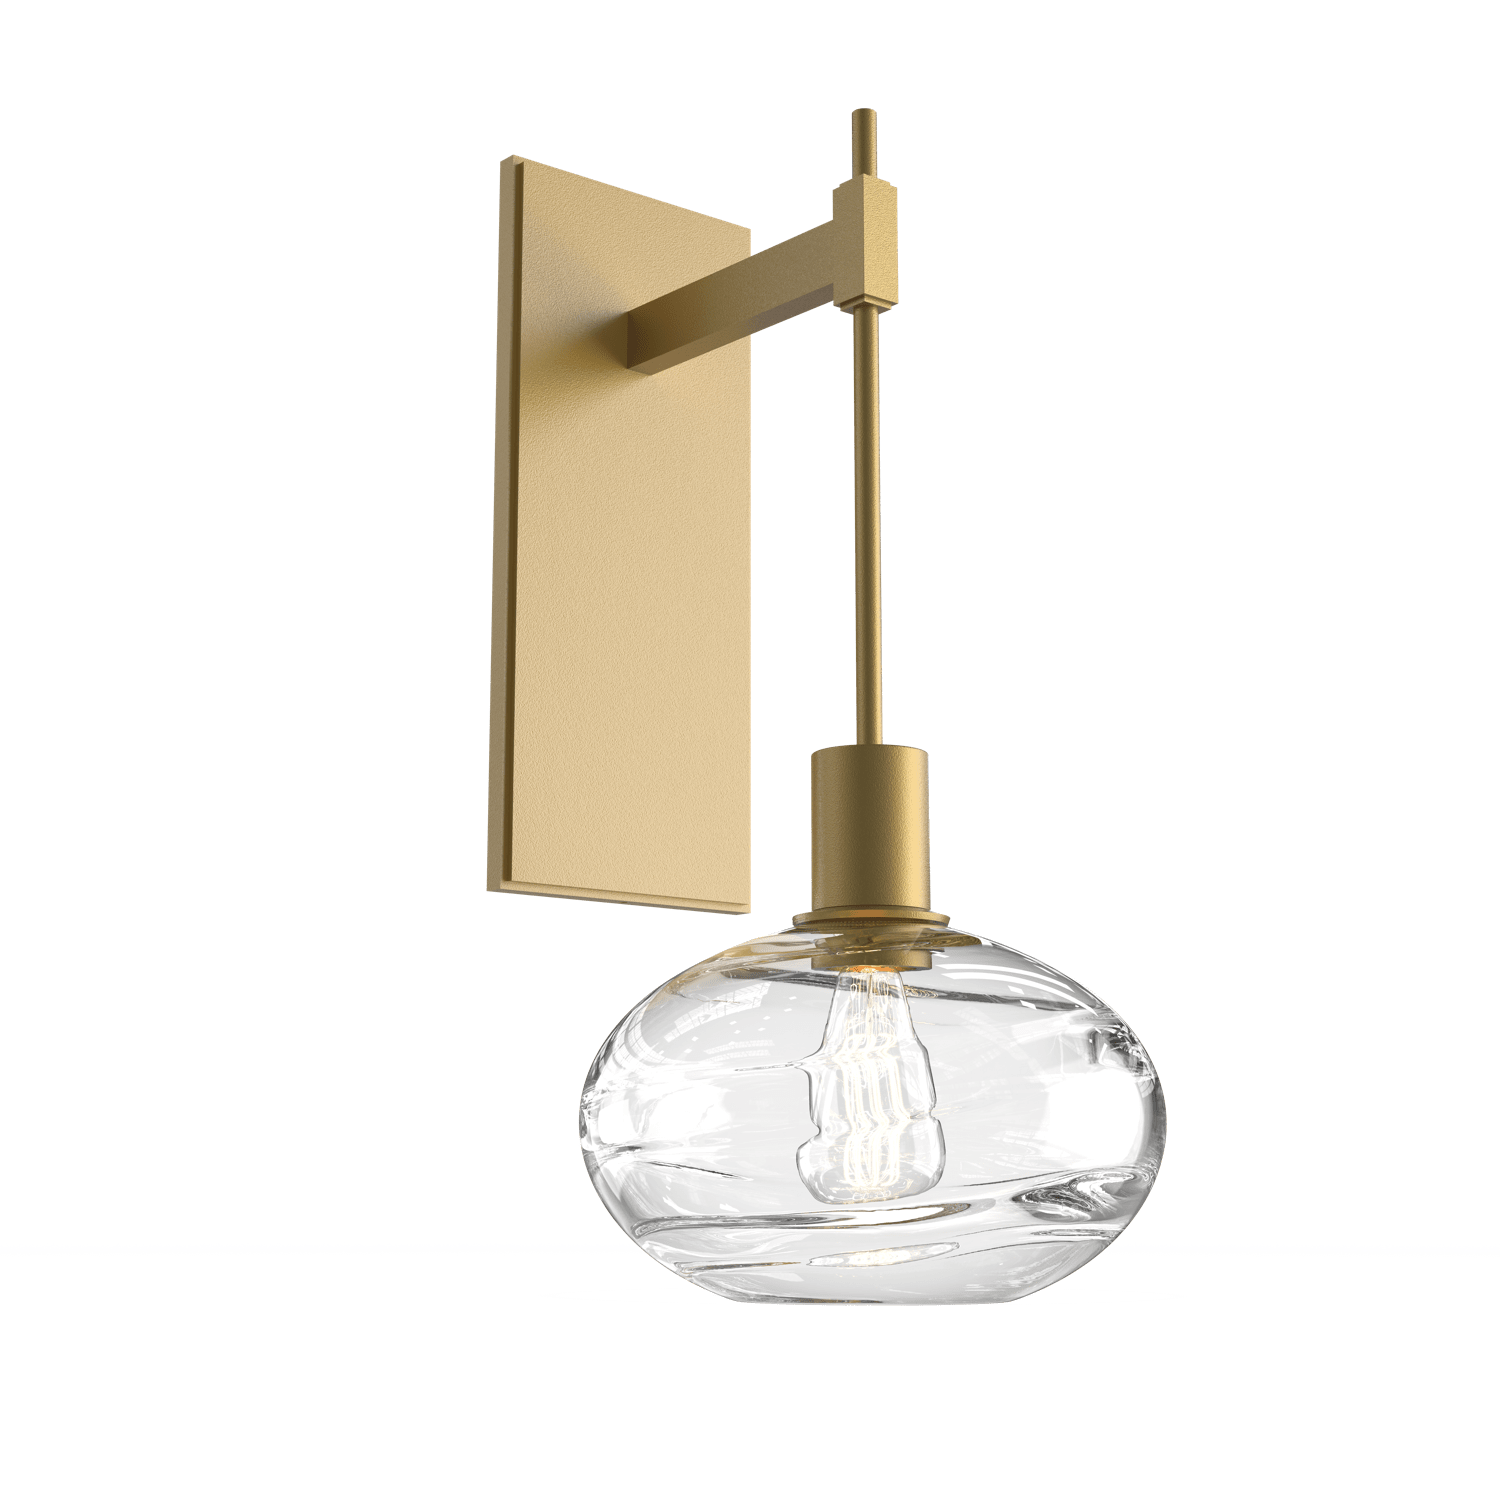 IDB0036-18-GB-OC-Hammerton-Studio-Optic-Blown-Glass-Coppa-tempo-wall-sconce-with-gilded-brass-finish-and-optic-clear-blown-glass-shades-and-incandescent-lamping